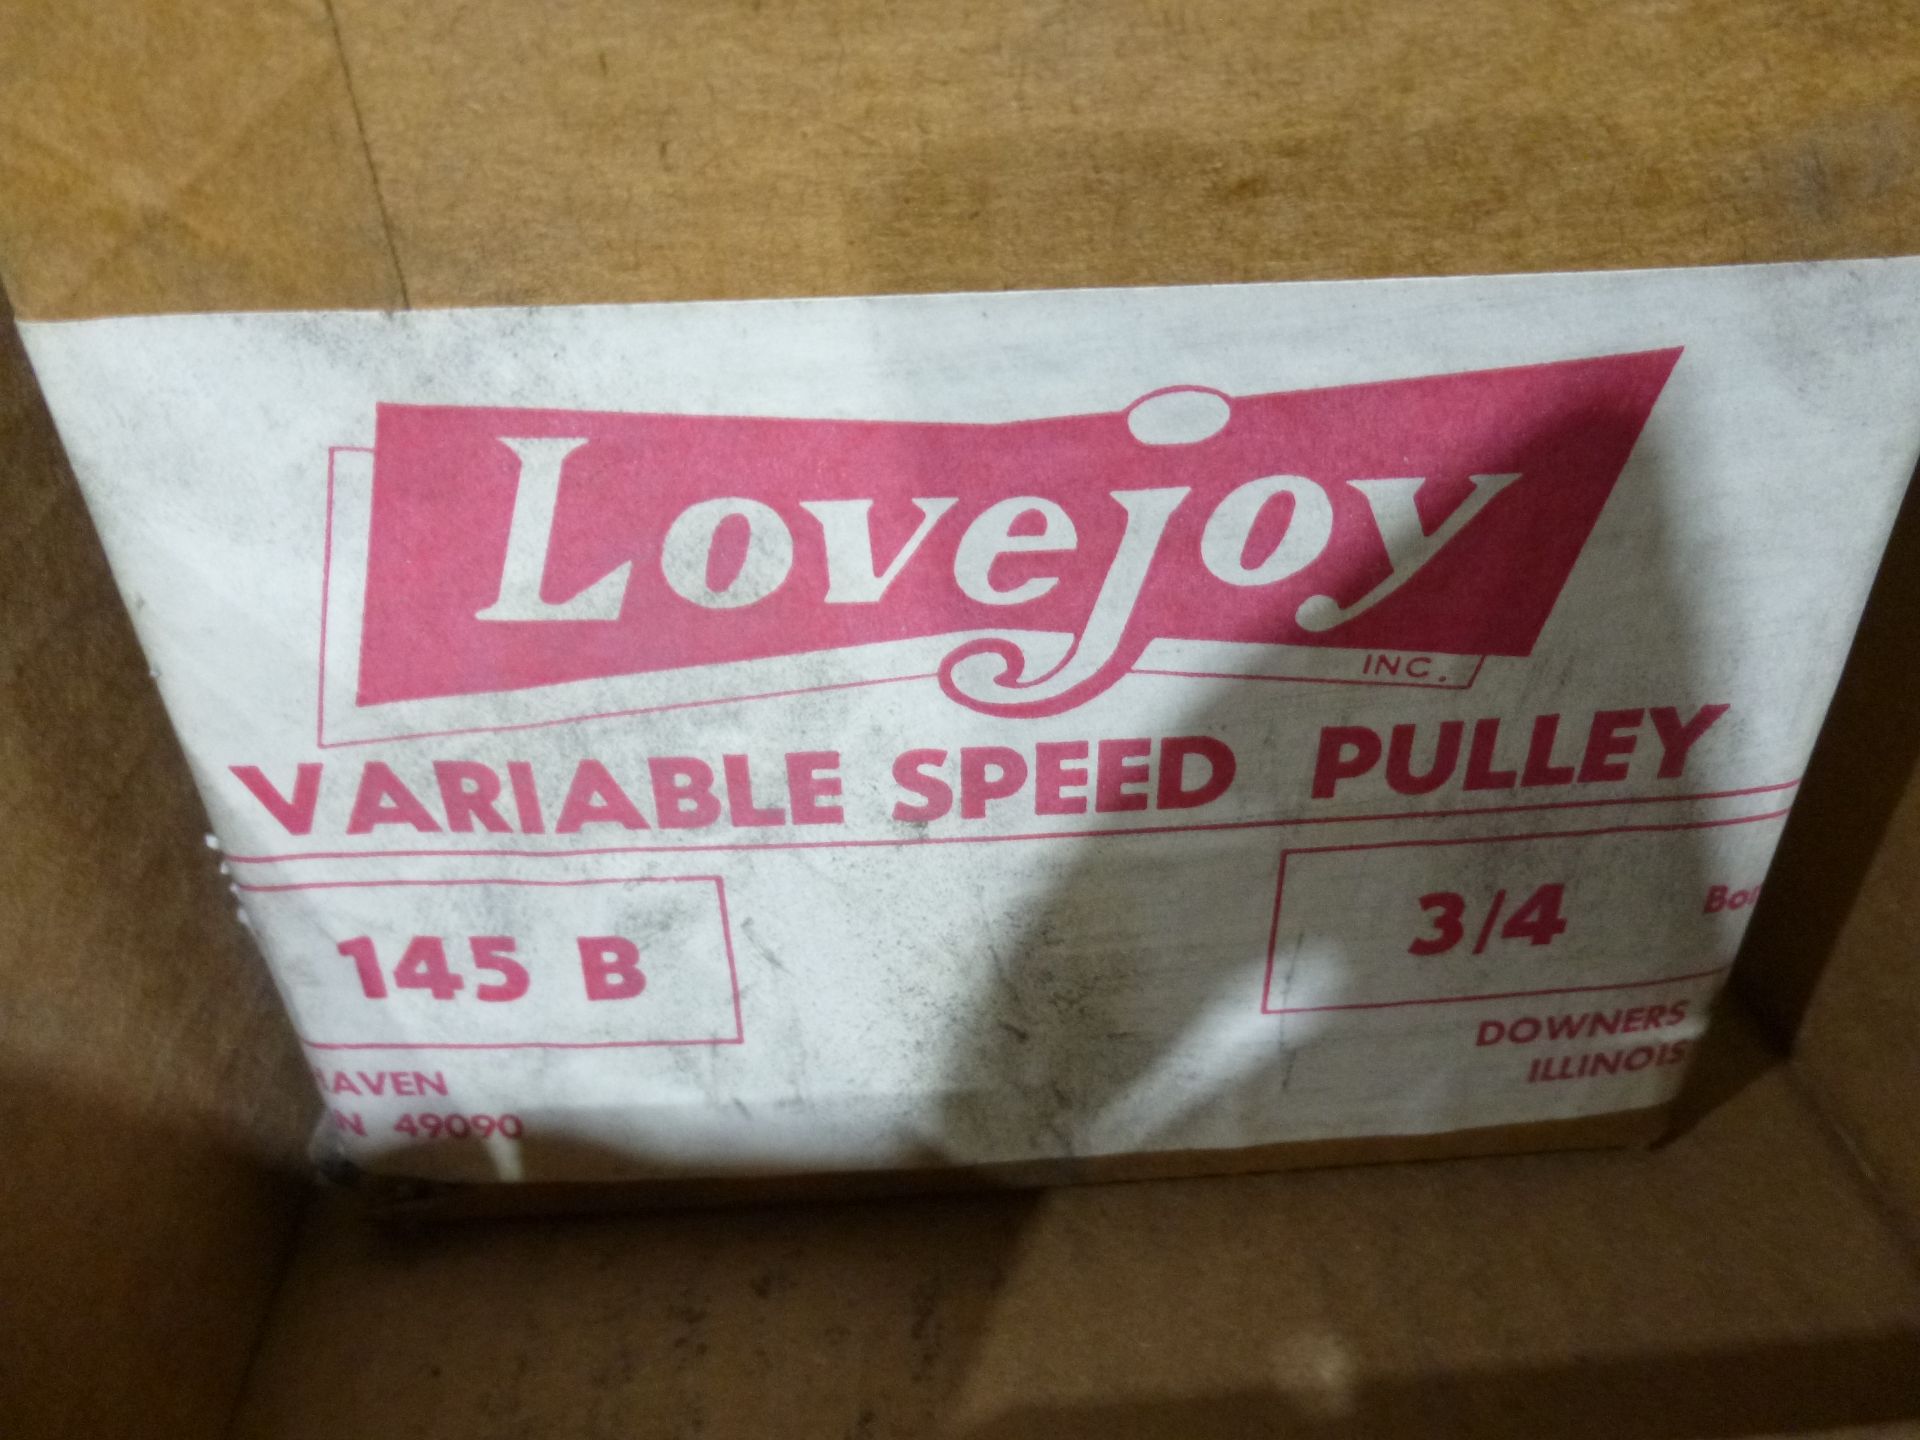 Lovejoy Model 145b, 3/4" new in box, as always with Brolyn LLC auctions, all lots can be picked up - Image 2 of 2